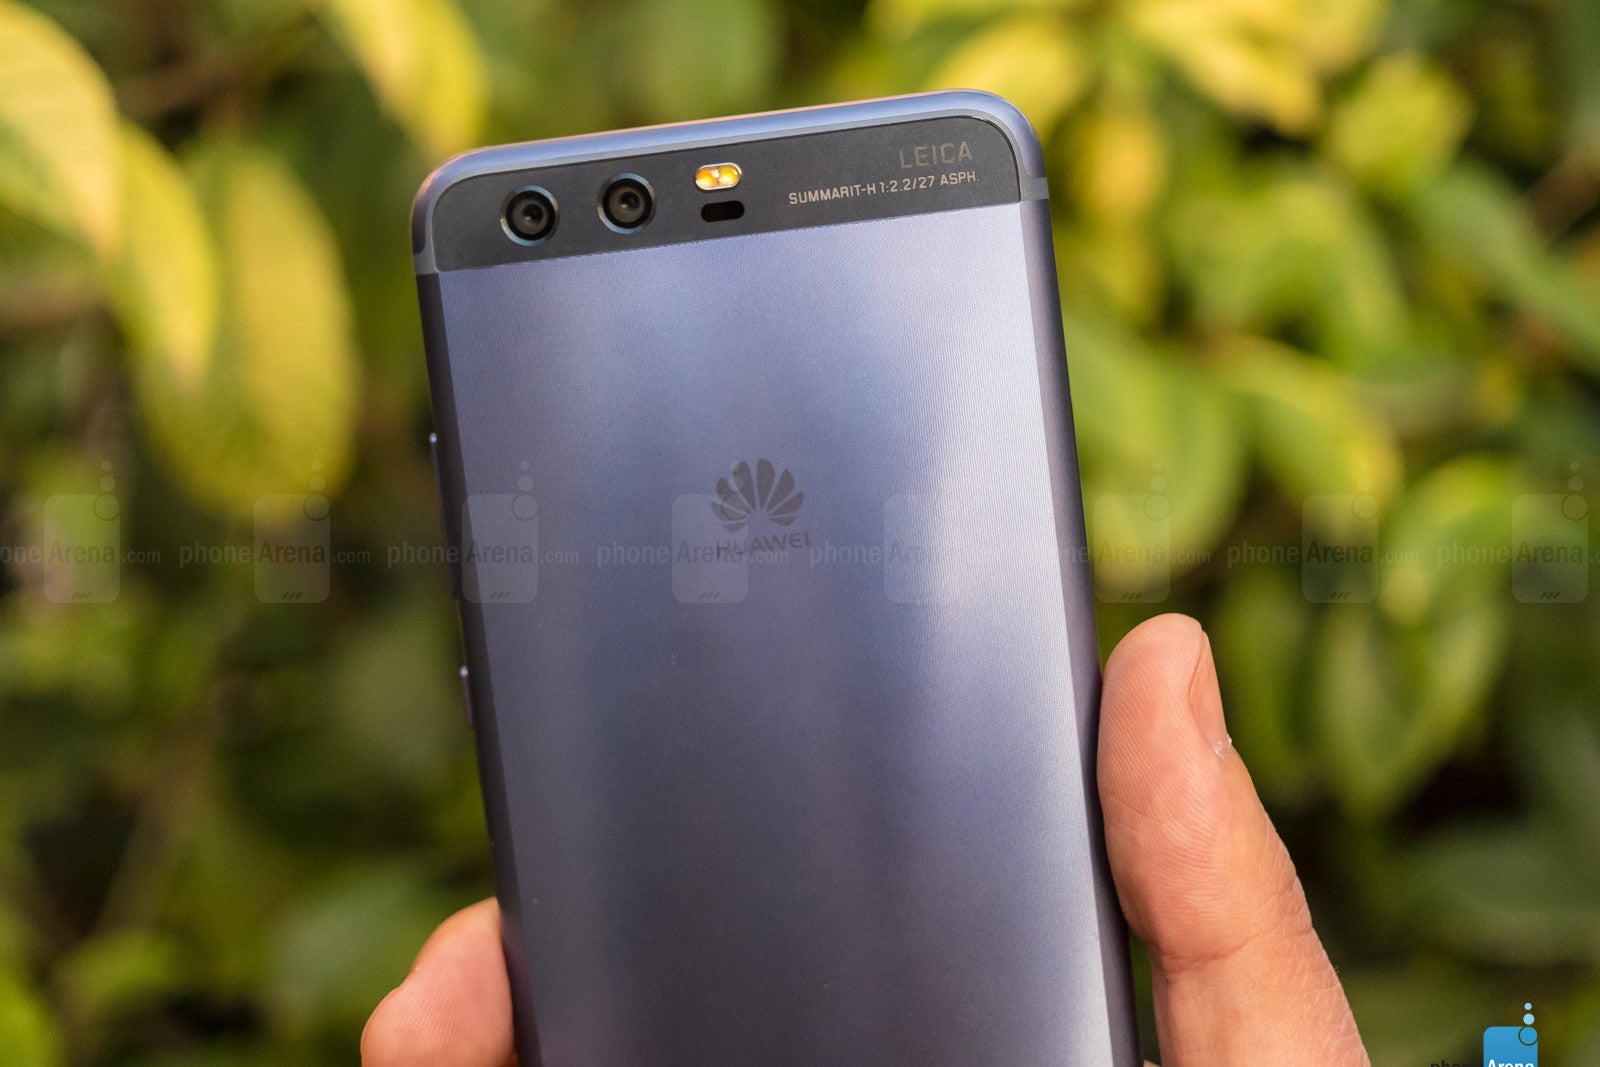 Huawei P10 & P10 Plus: hands-on impressions of this sleek, dual-camera flagship